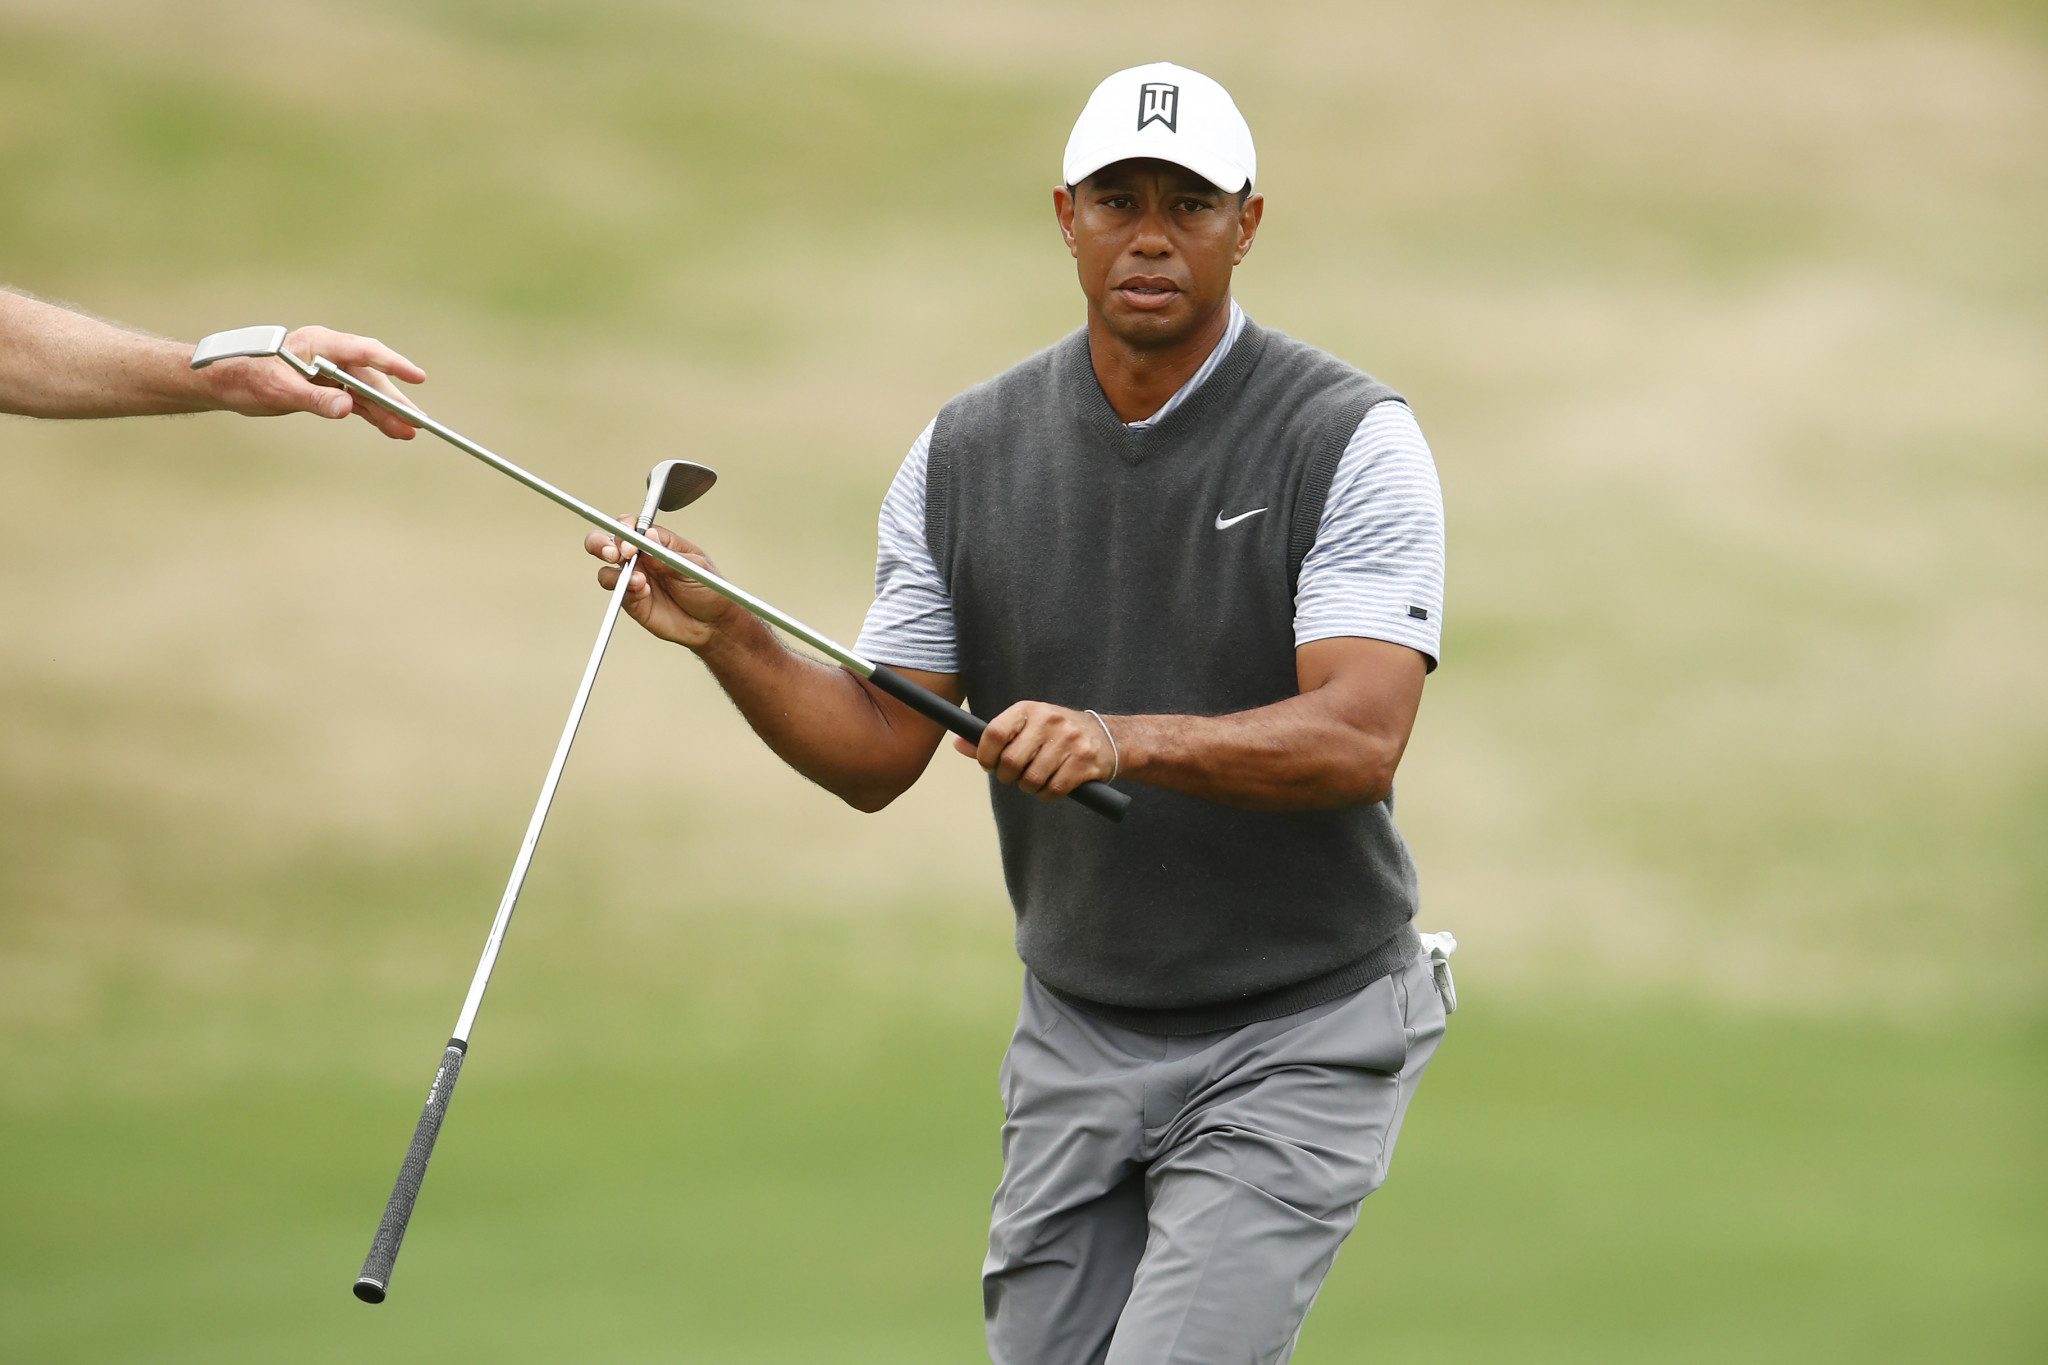 Woods to face McIlroy in mouthwatering showdown at WGC Dell-Technologies Match Play  